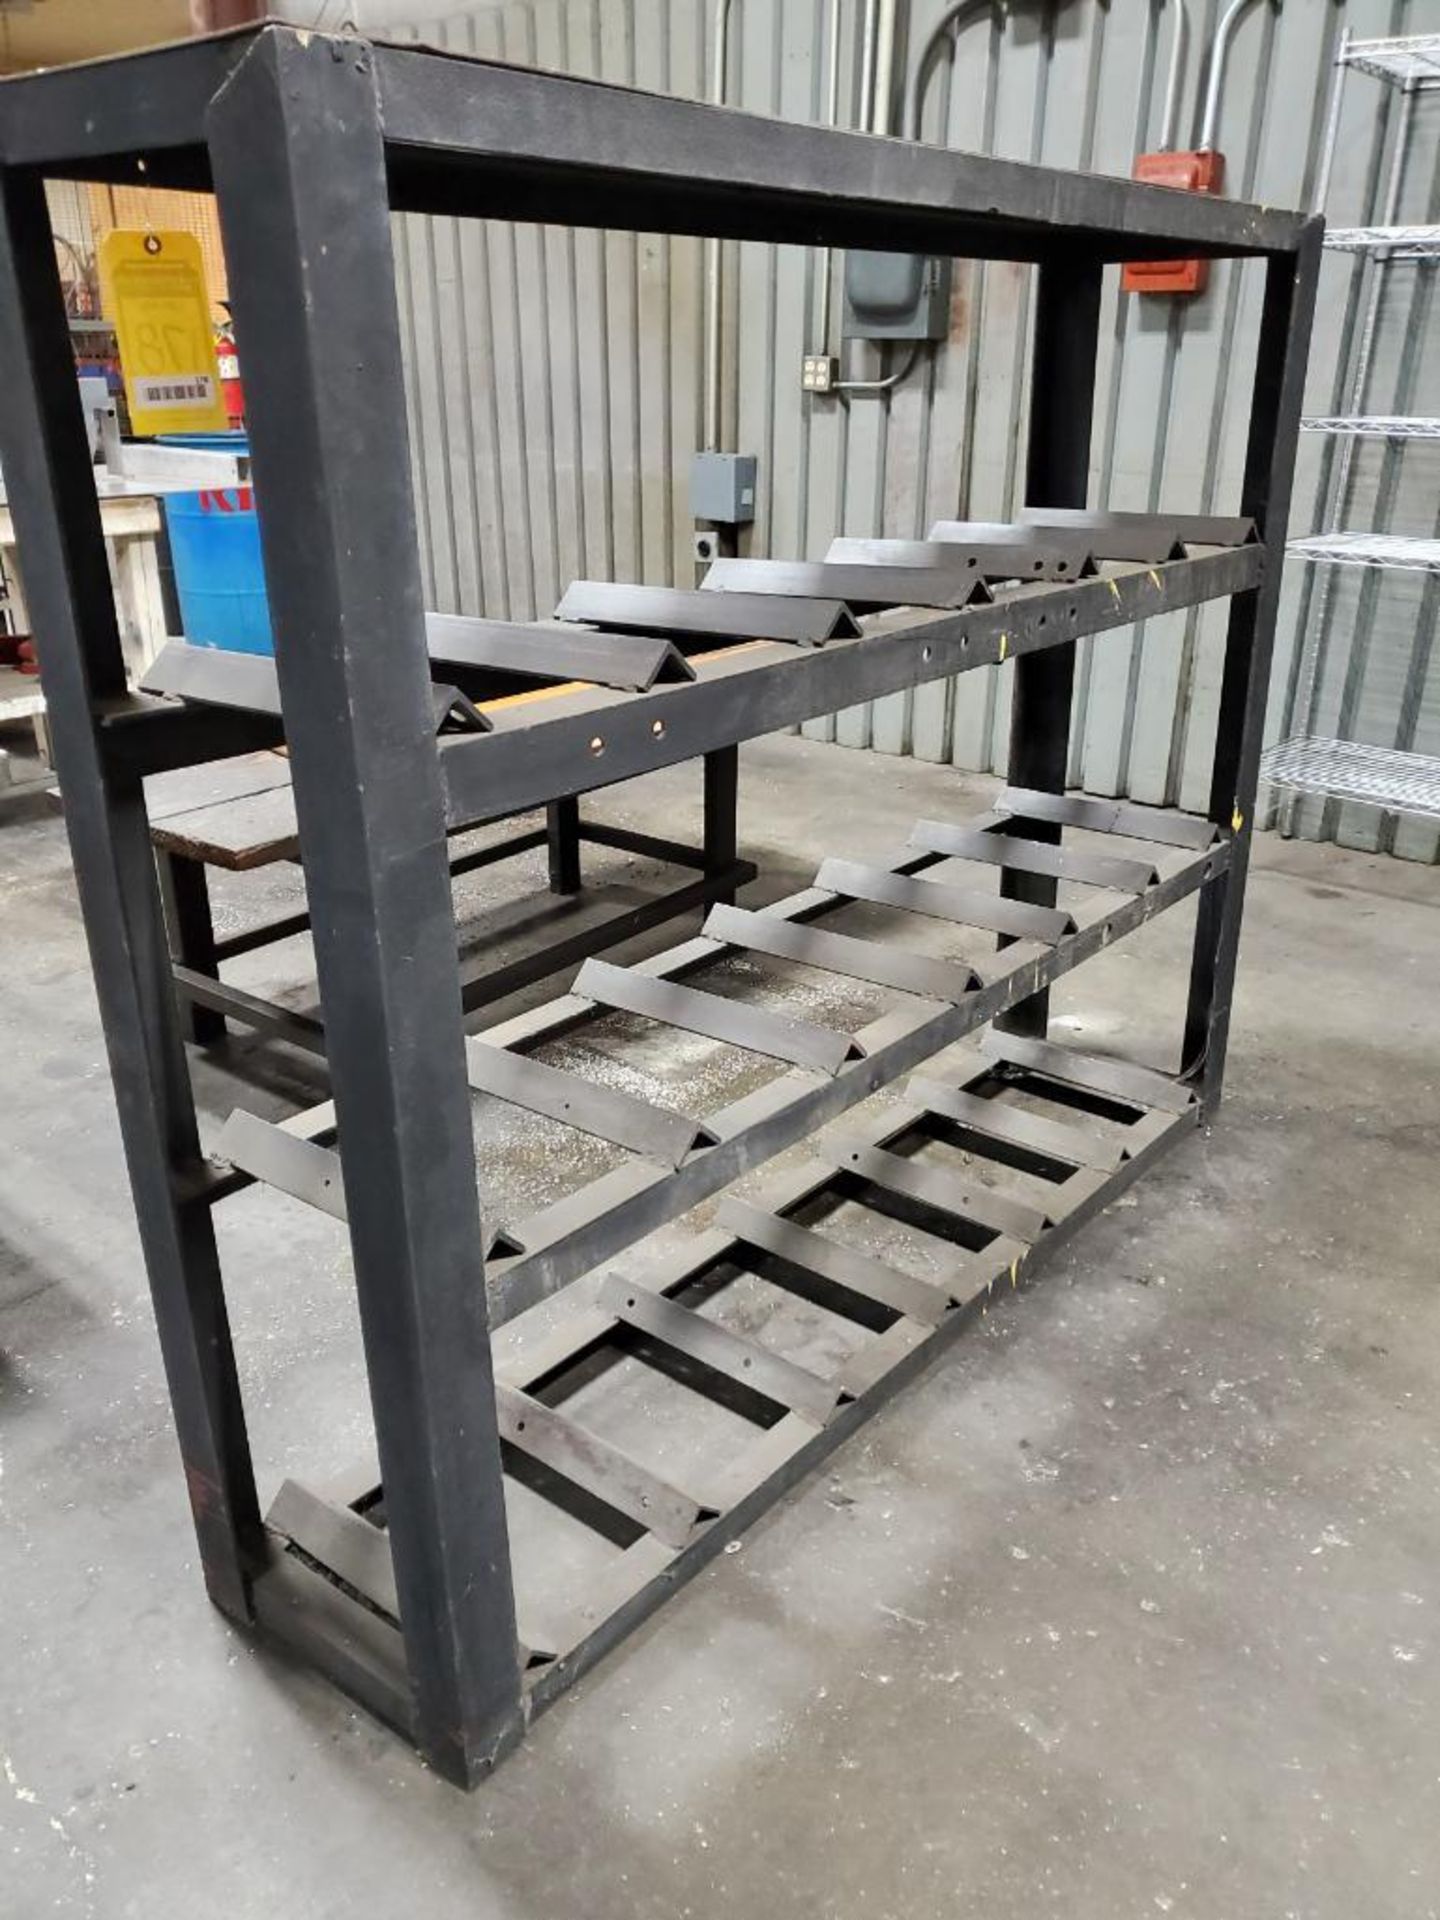 STEEL RACK W/ CONTENTS INCLUDING: PRECISION MACHINING JIGS & FIXTURES, ANGLE BLOCK, & MORE - Image 4 of 14